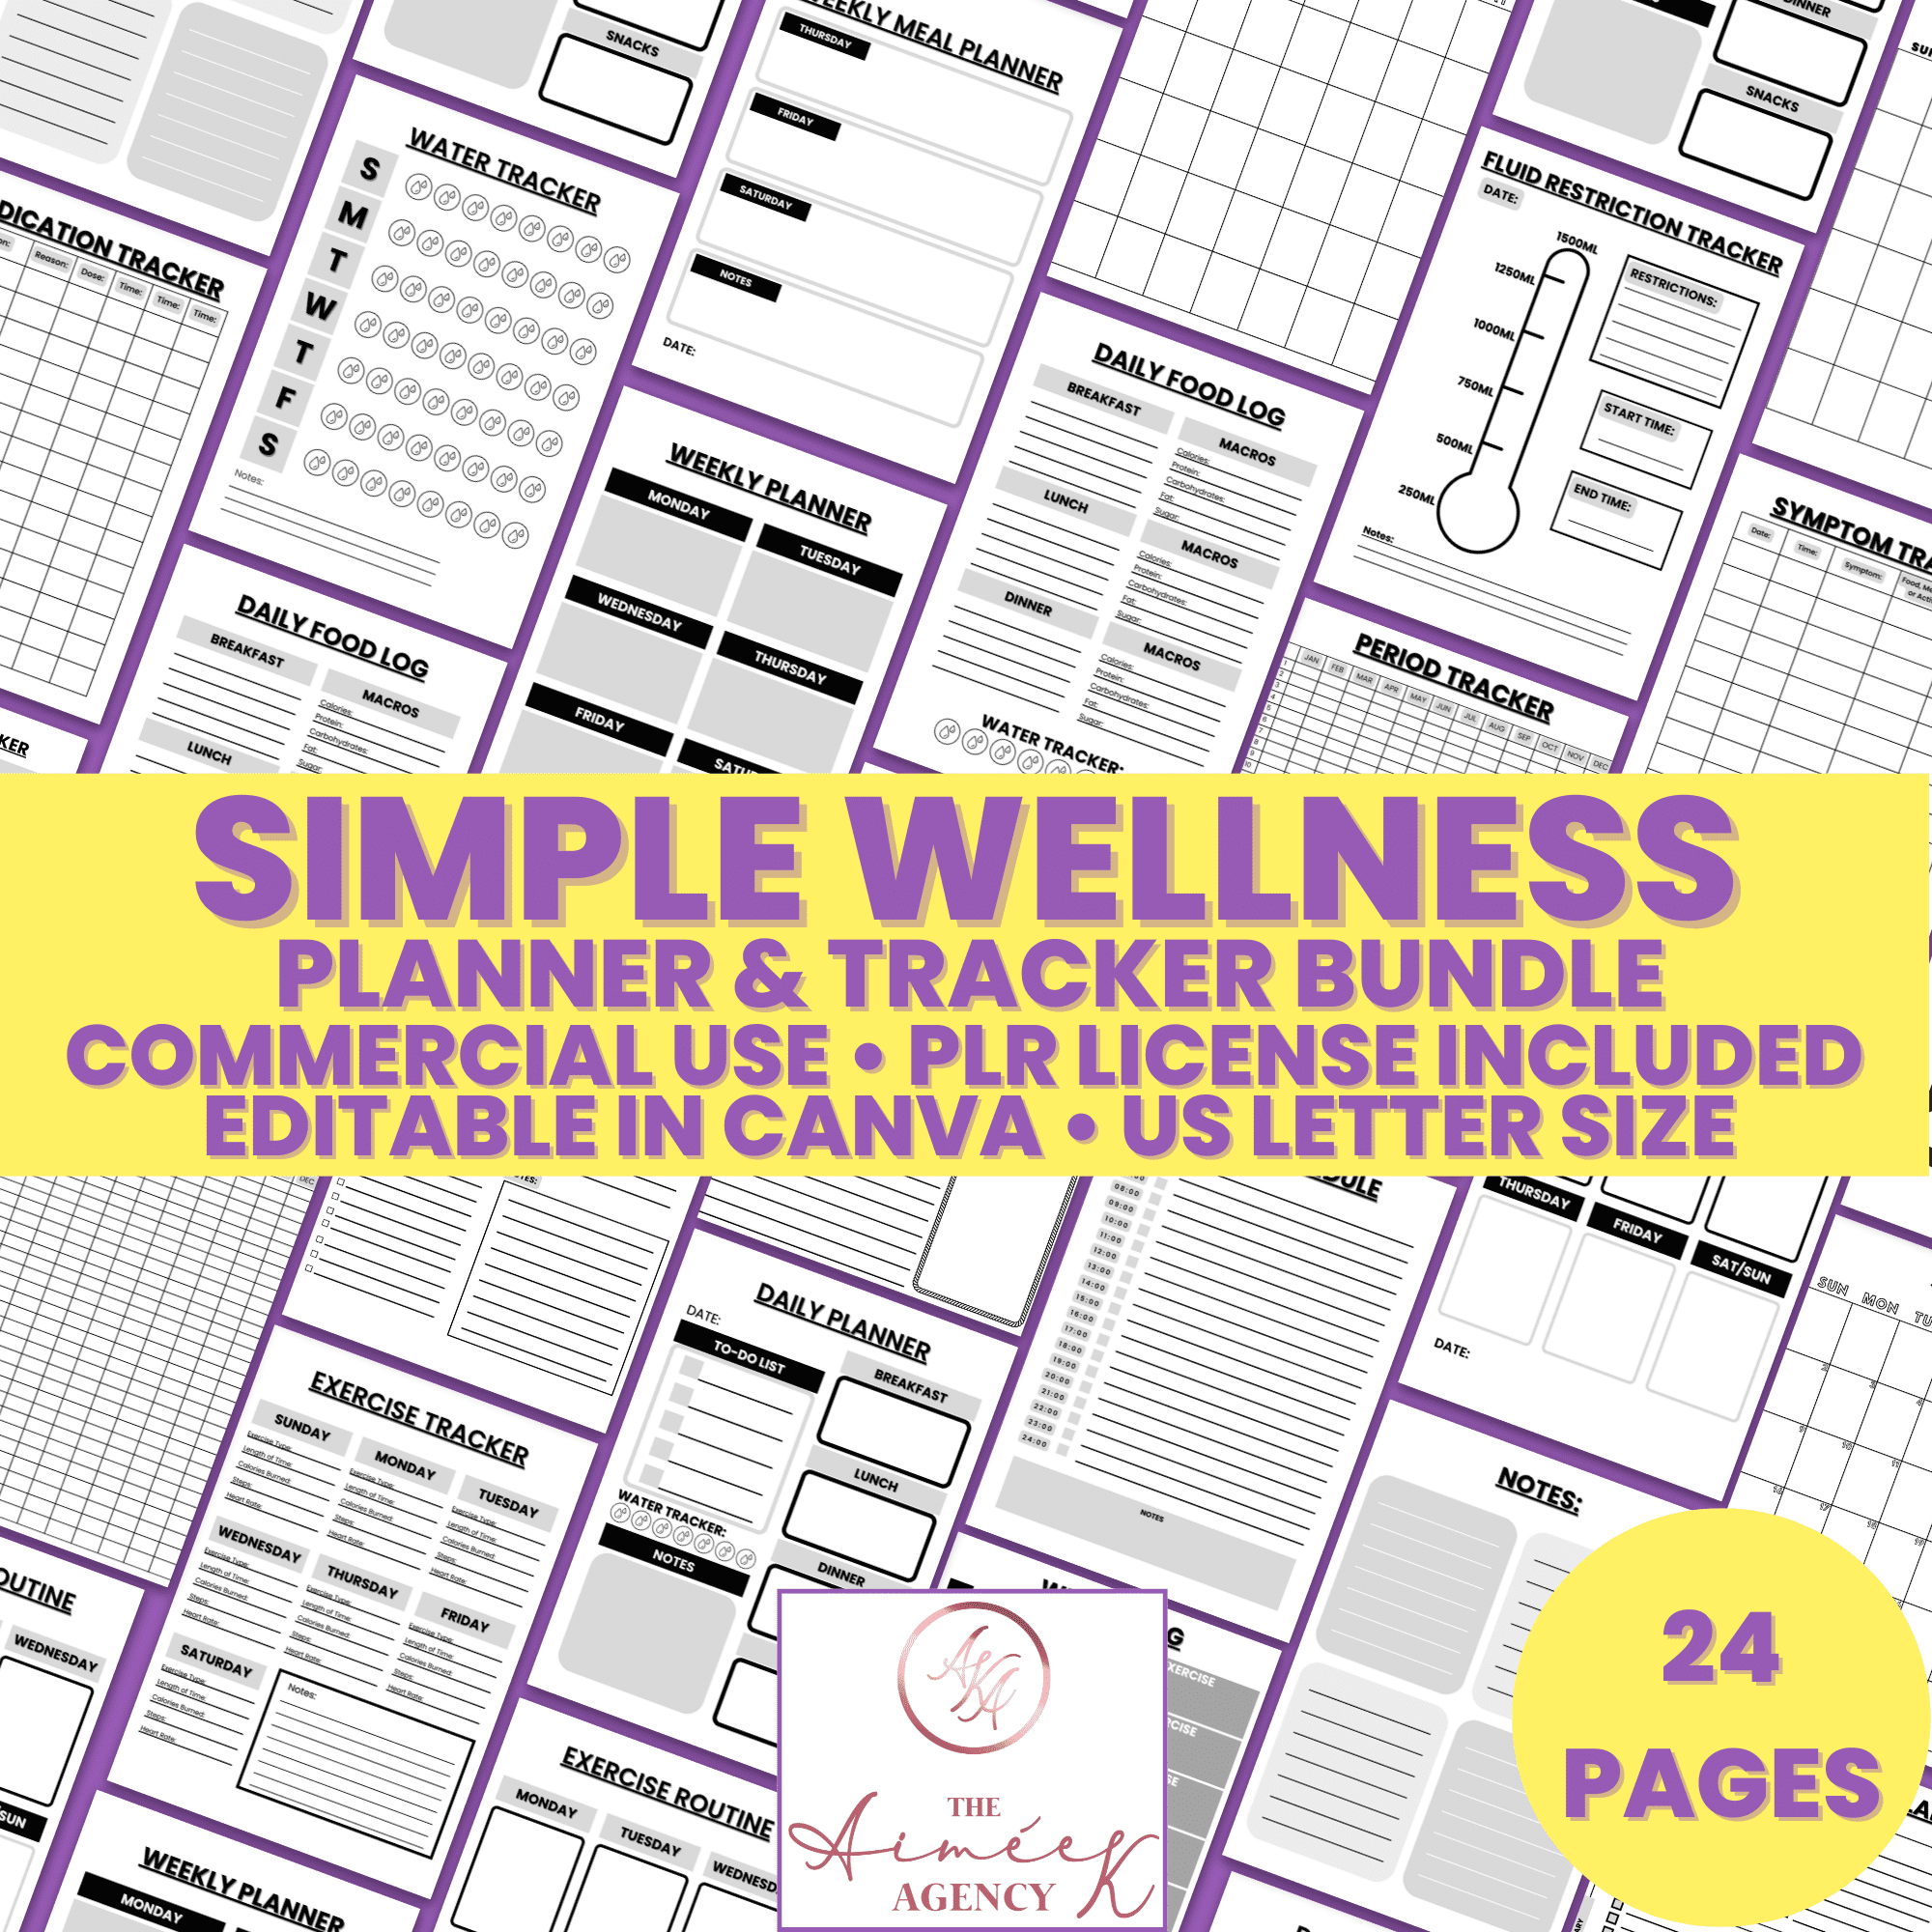 A collection of 24 wellness planner and tracker pages, commercially usable and editable in Canva, in US letter size. Features include meal trackers, exercise logs, habit trackers, and more.